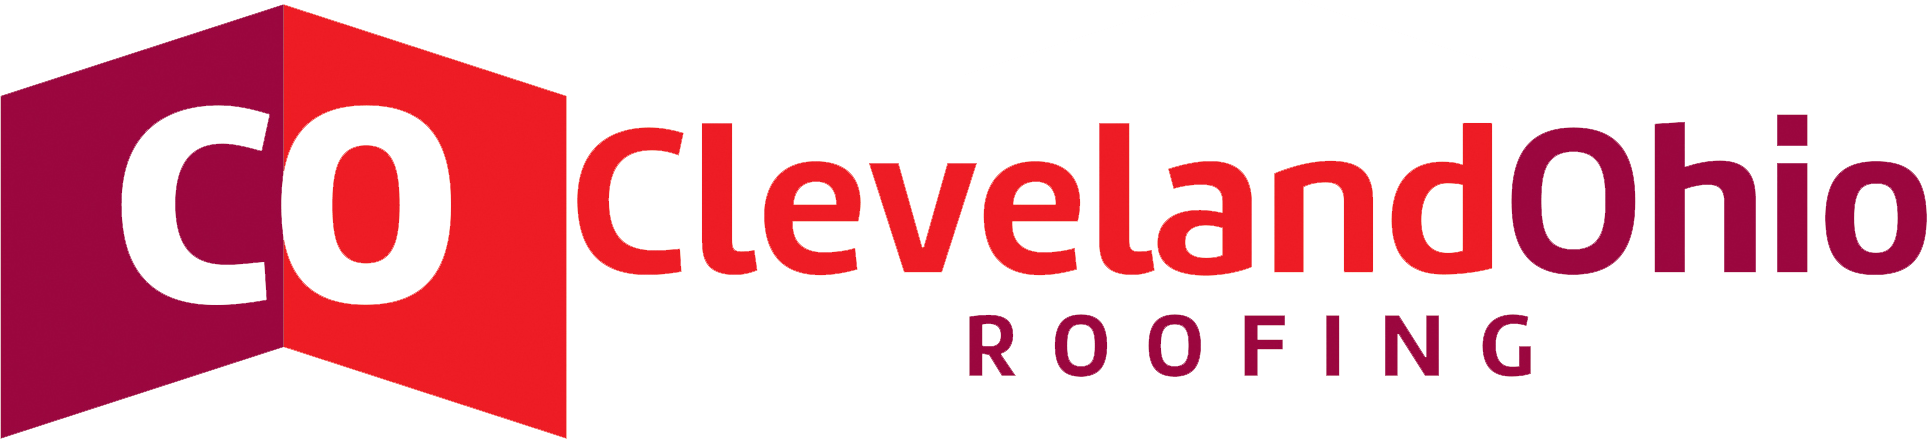 cleohrooflogowide__1605377914